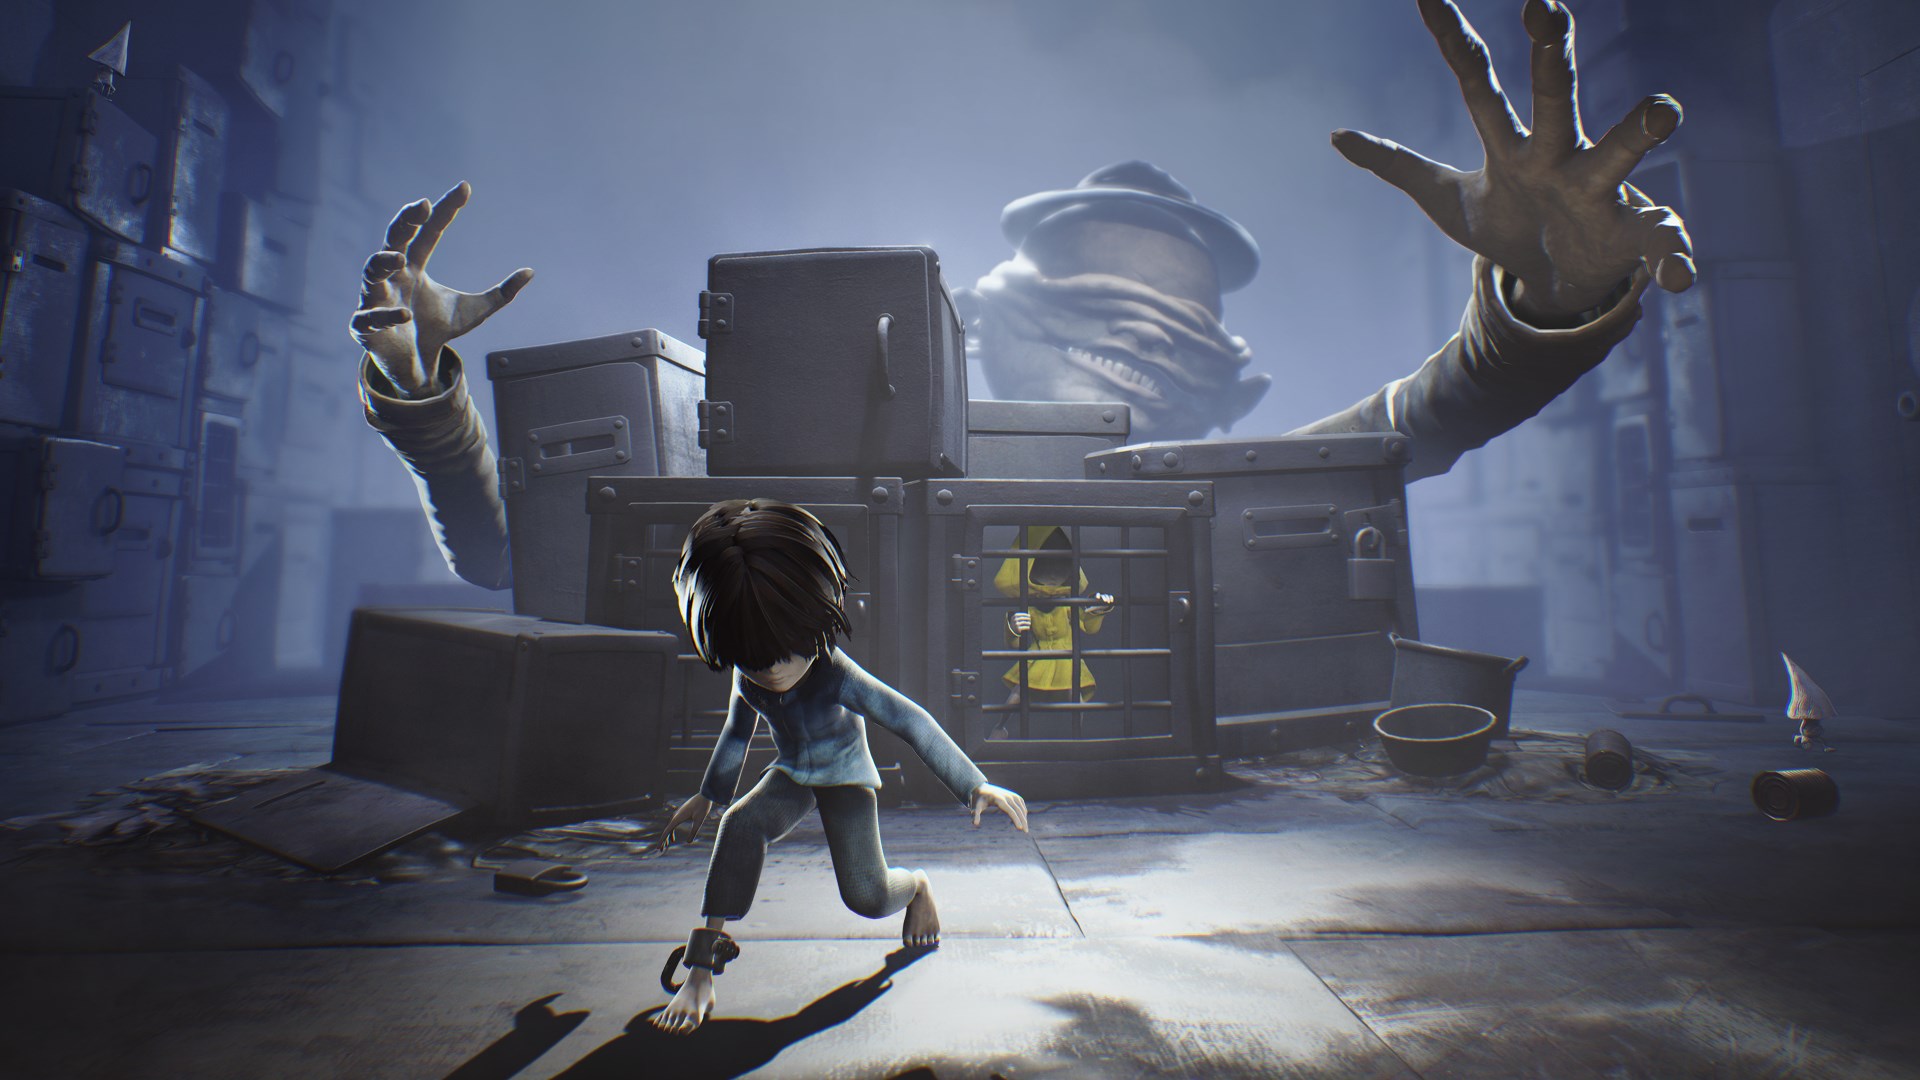 Explore The Maw In This Interactive Demo Video For Little Nightmares - Hey  Poor Player